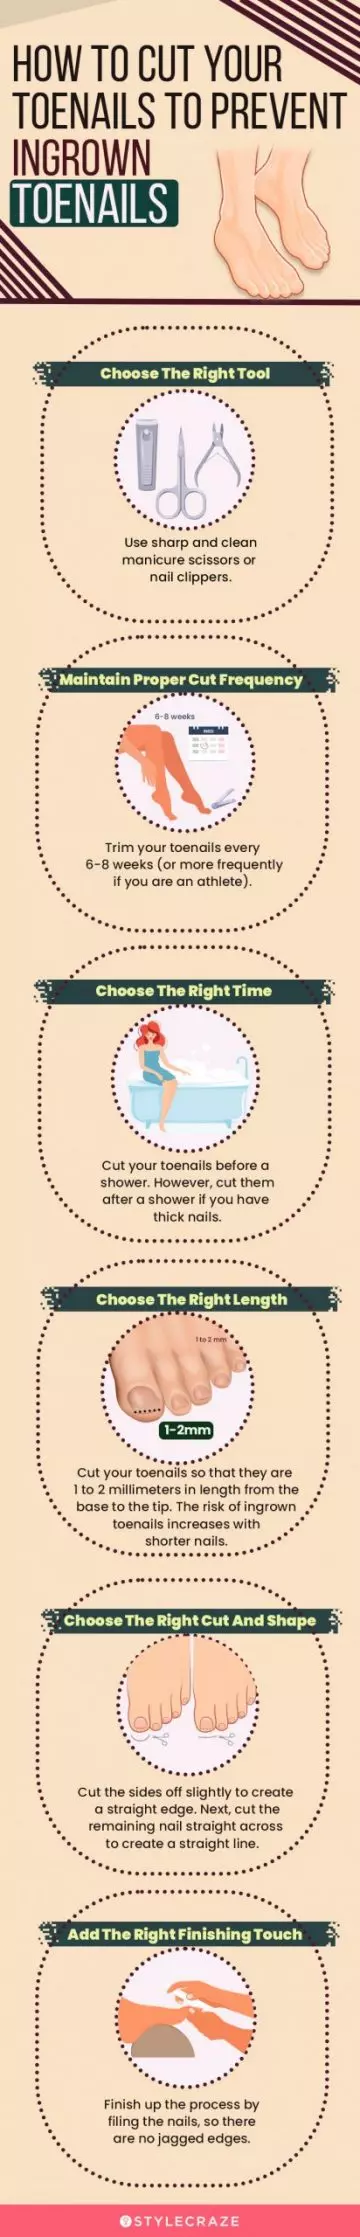 how to cut your toenails to prevent ingrown toenails (infographic)